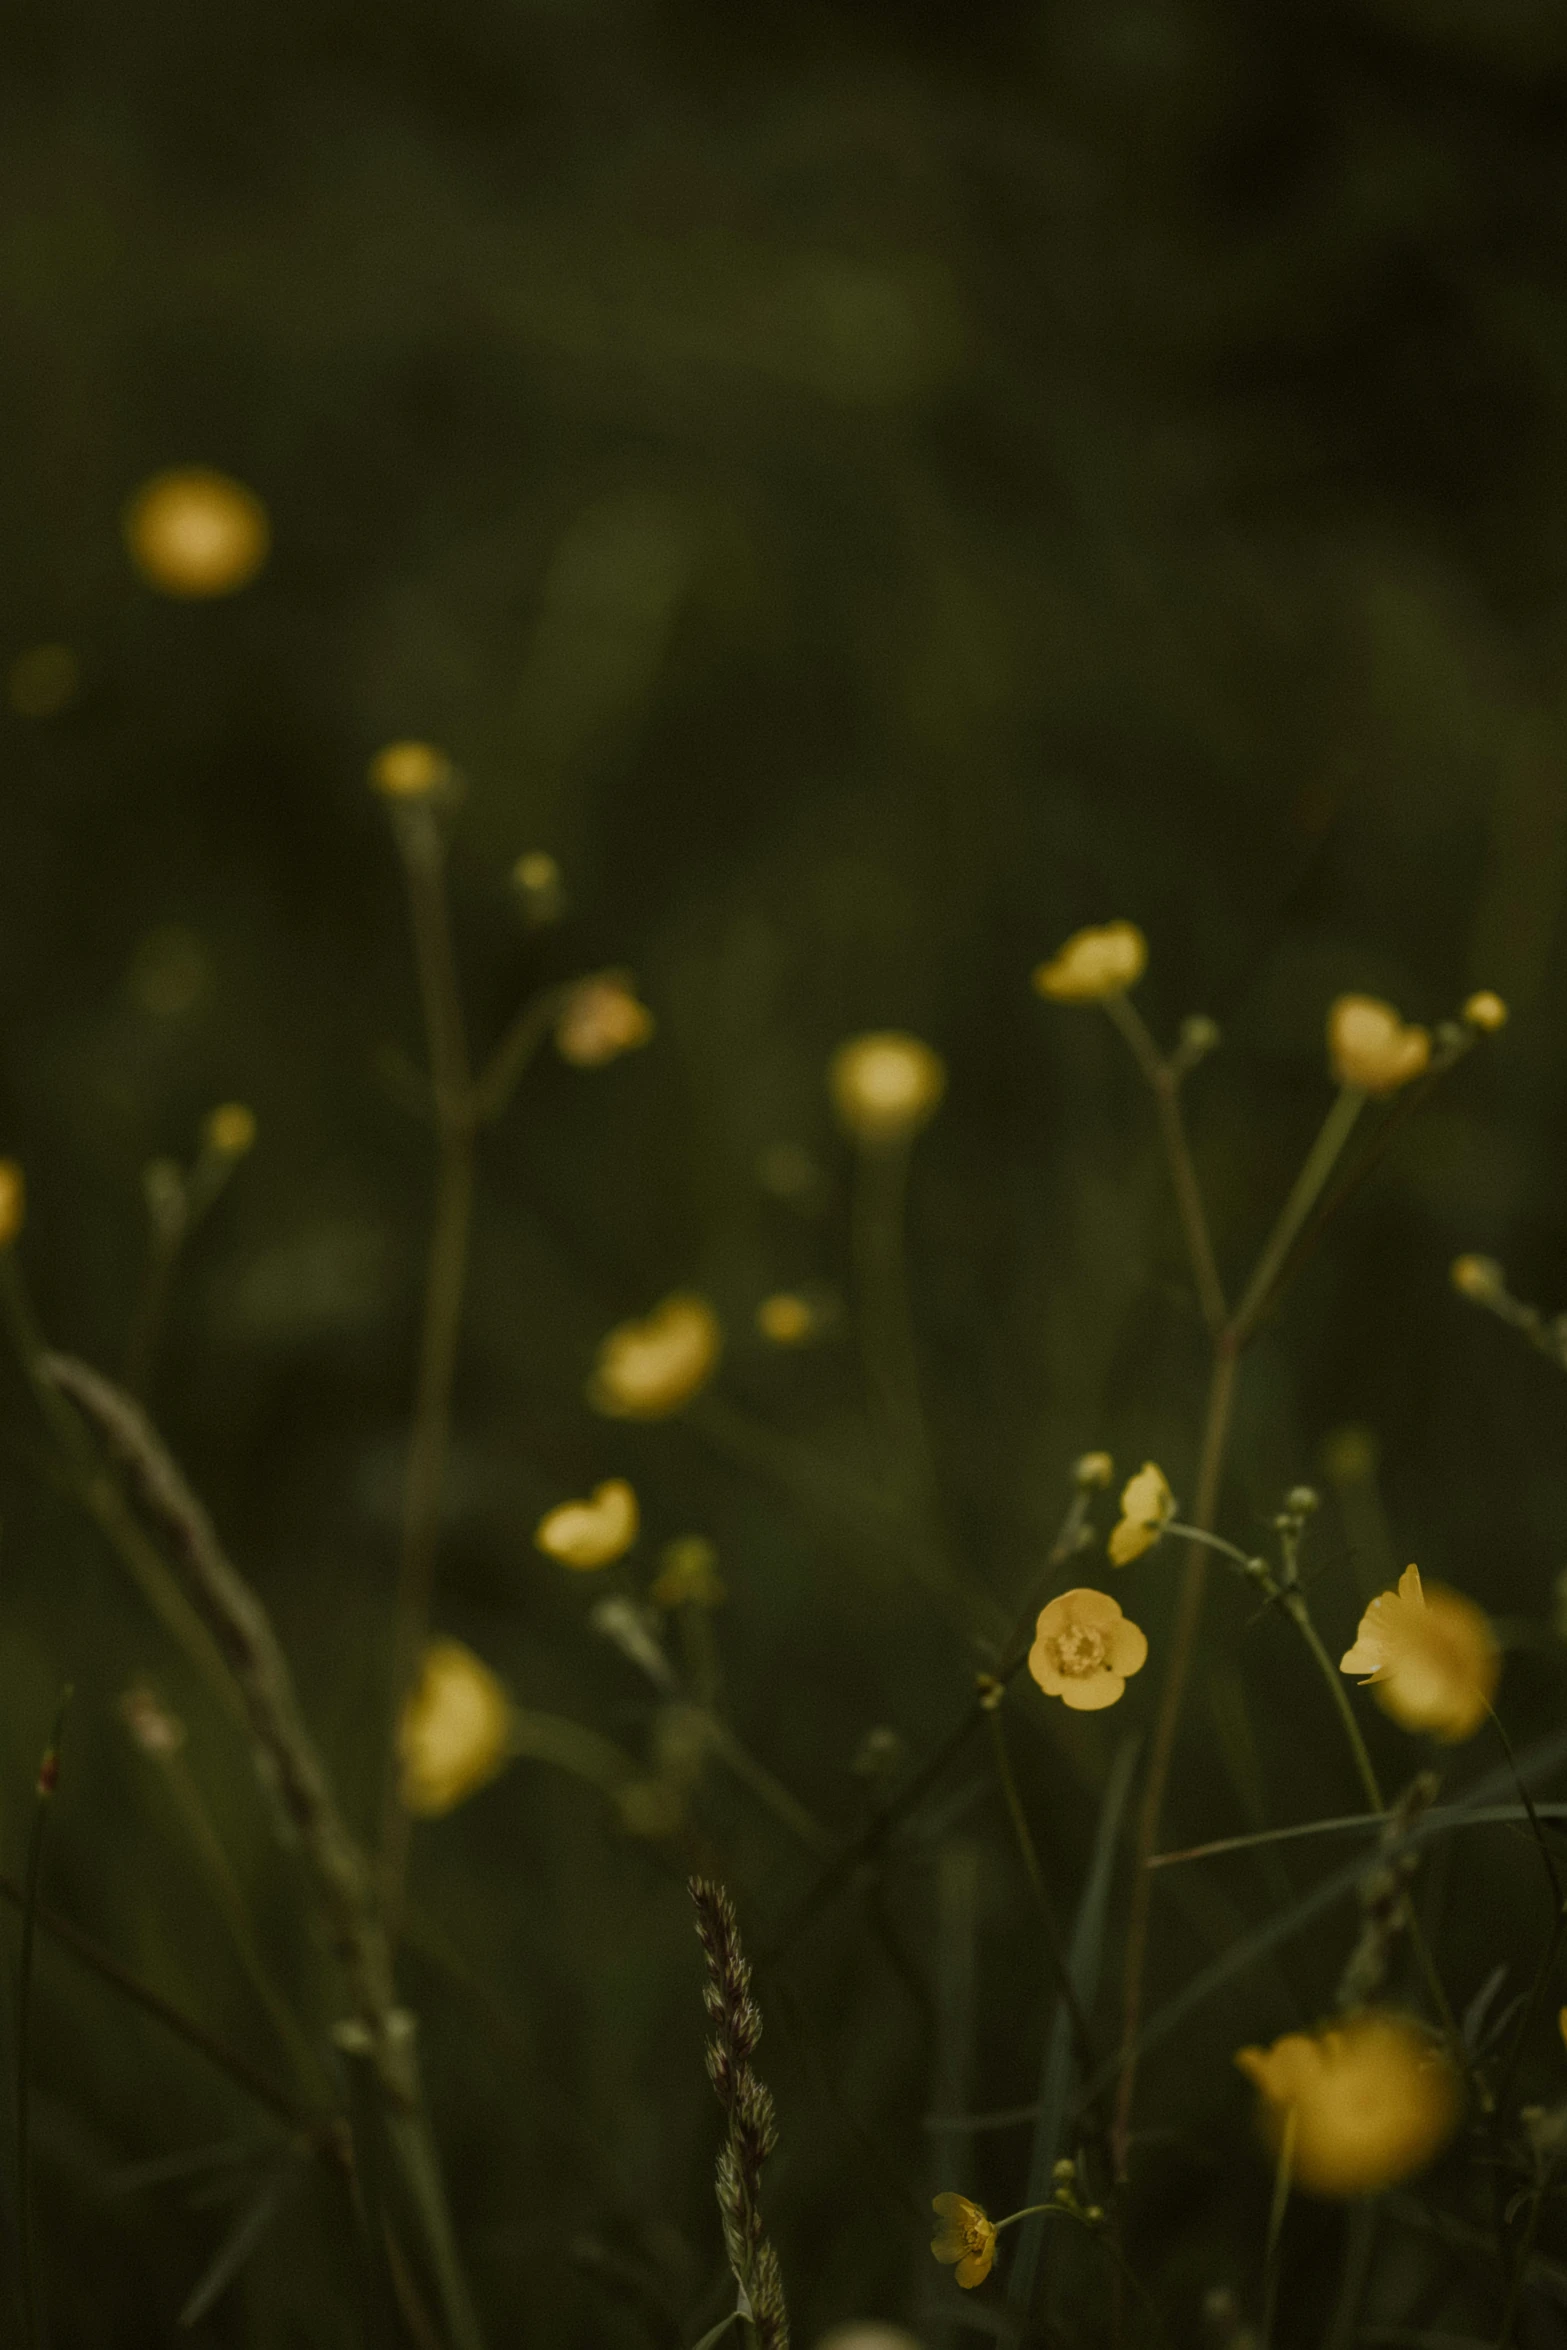 small yellow flowers sitting in a grassy field